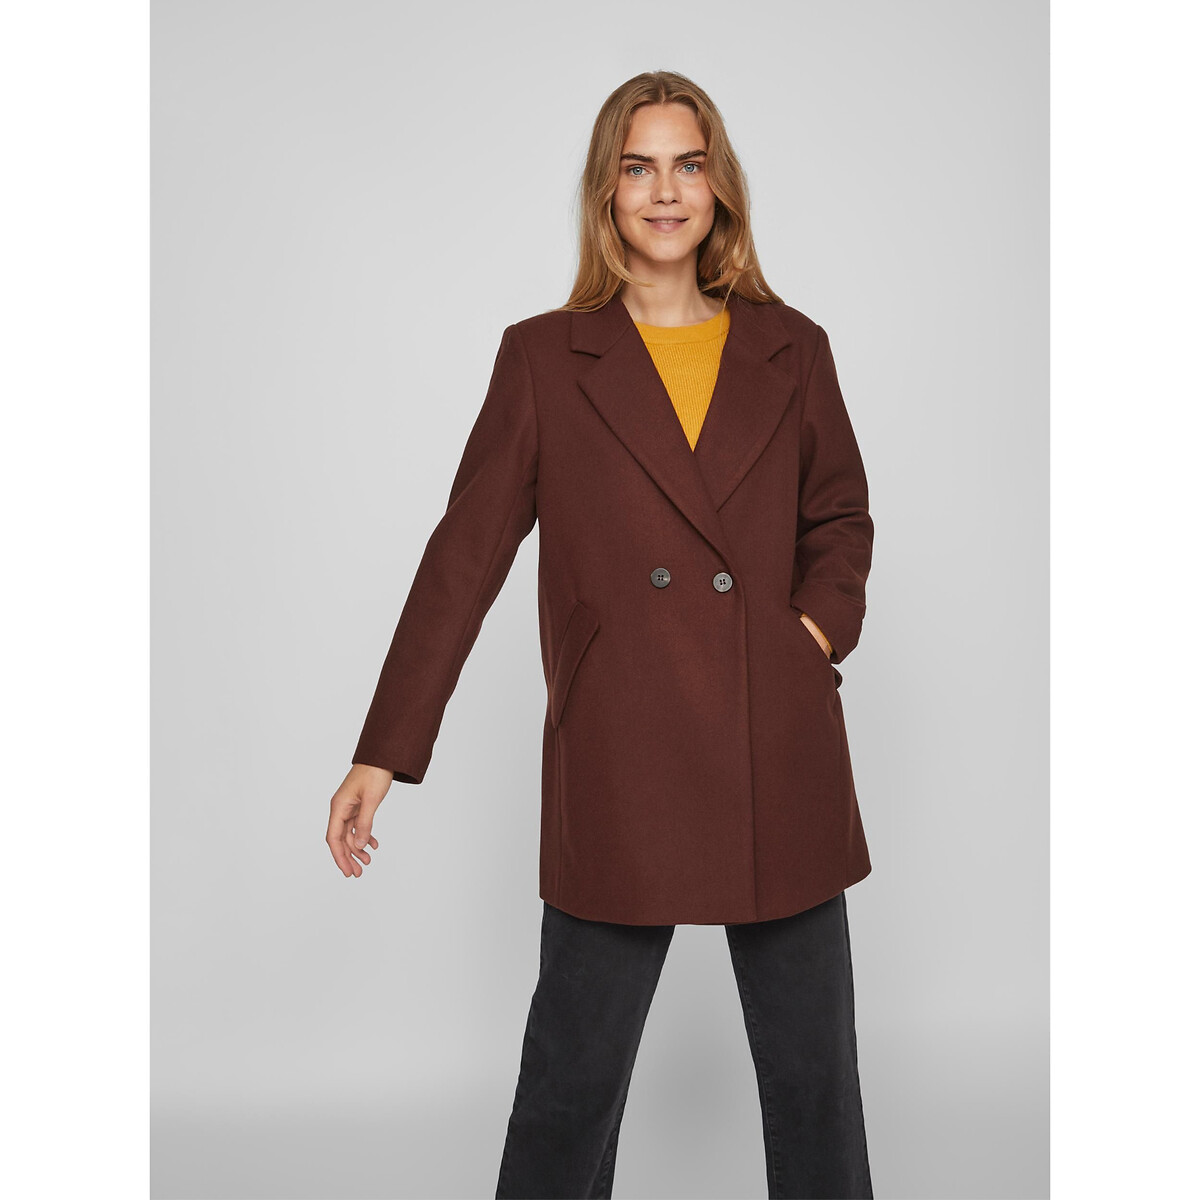 Image of Mid-Length Pea Coat with Button Fastening, Mid-Season